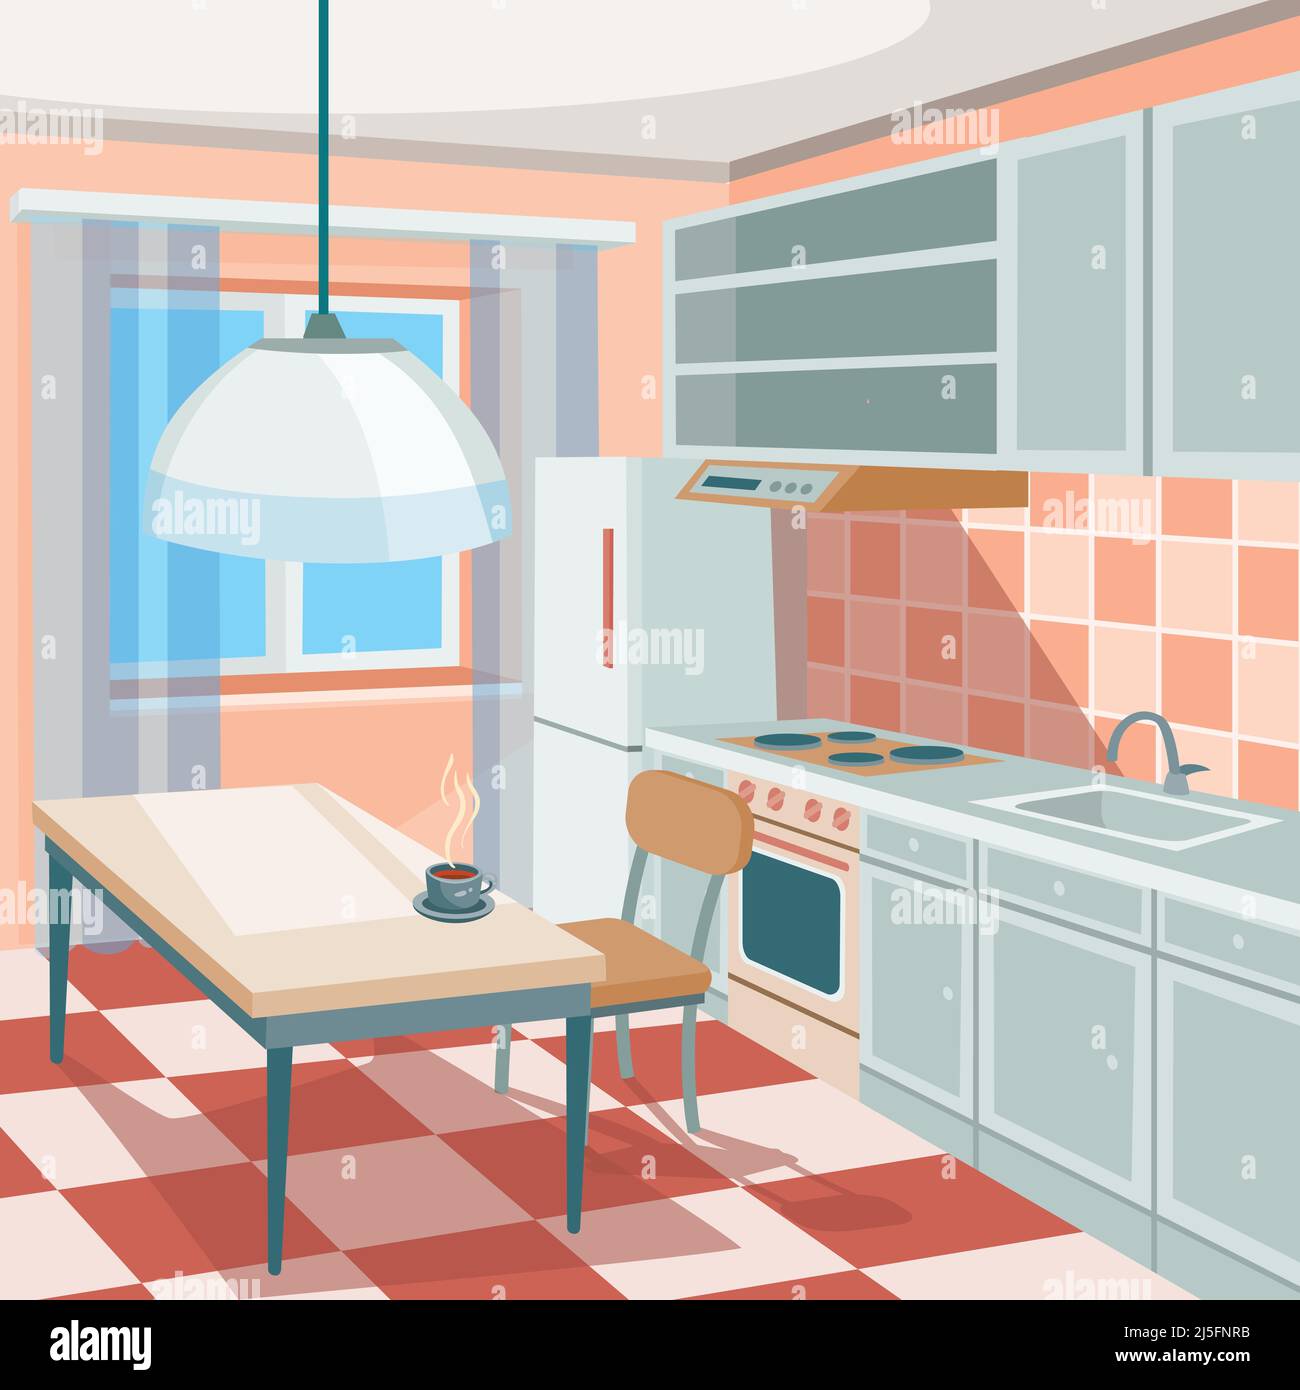 Vector cartoon illustration of a kitchen interior with kitchen cabinets, a dining table with a cup of hot coffee or tea, a refrigerator, a cooker, a k Stock Vector